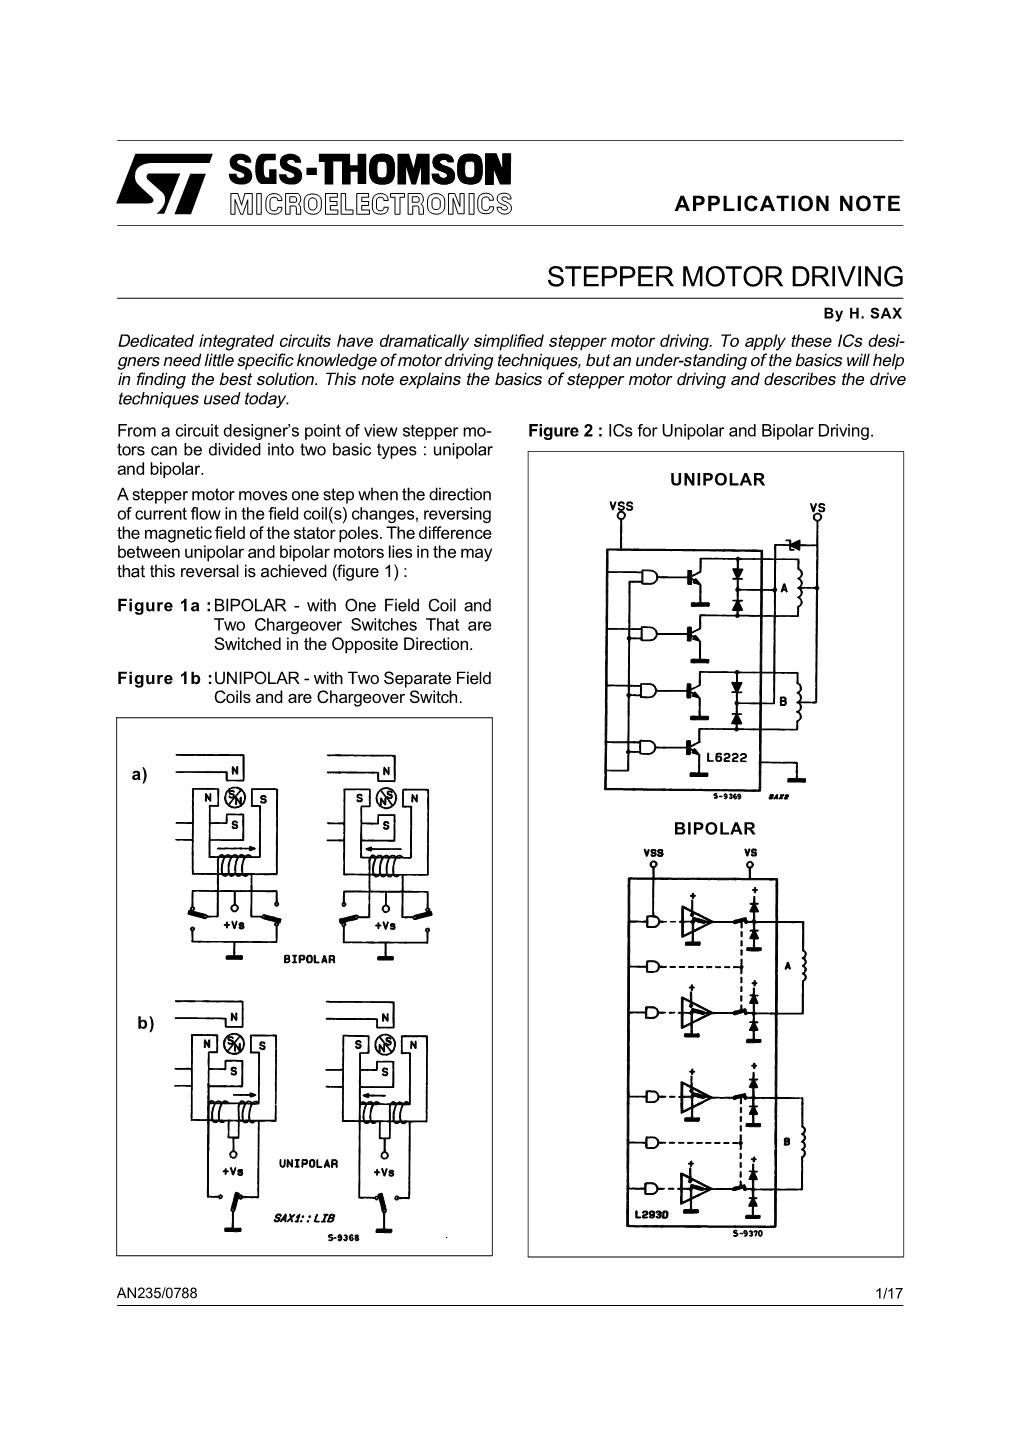 STEPPER MOTOR DRIVING by H